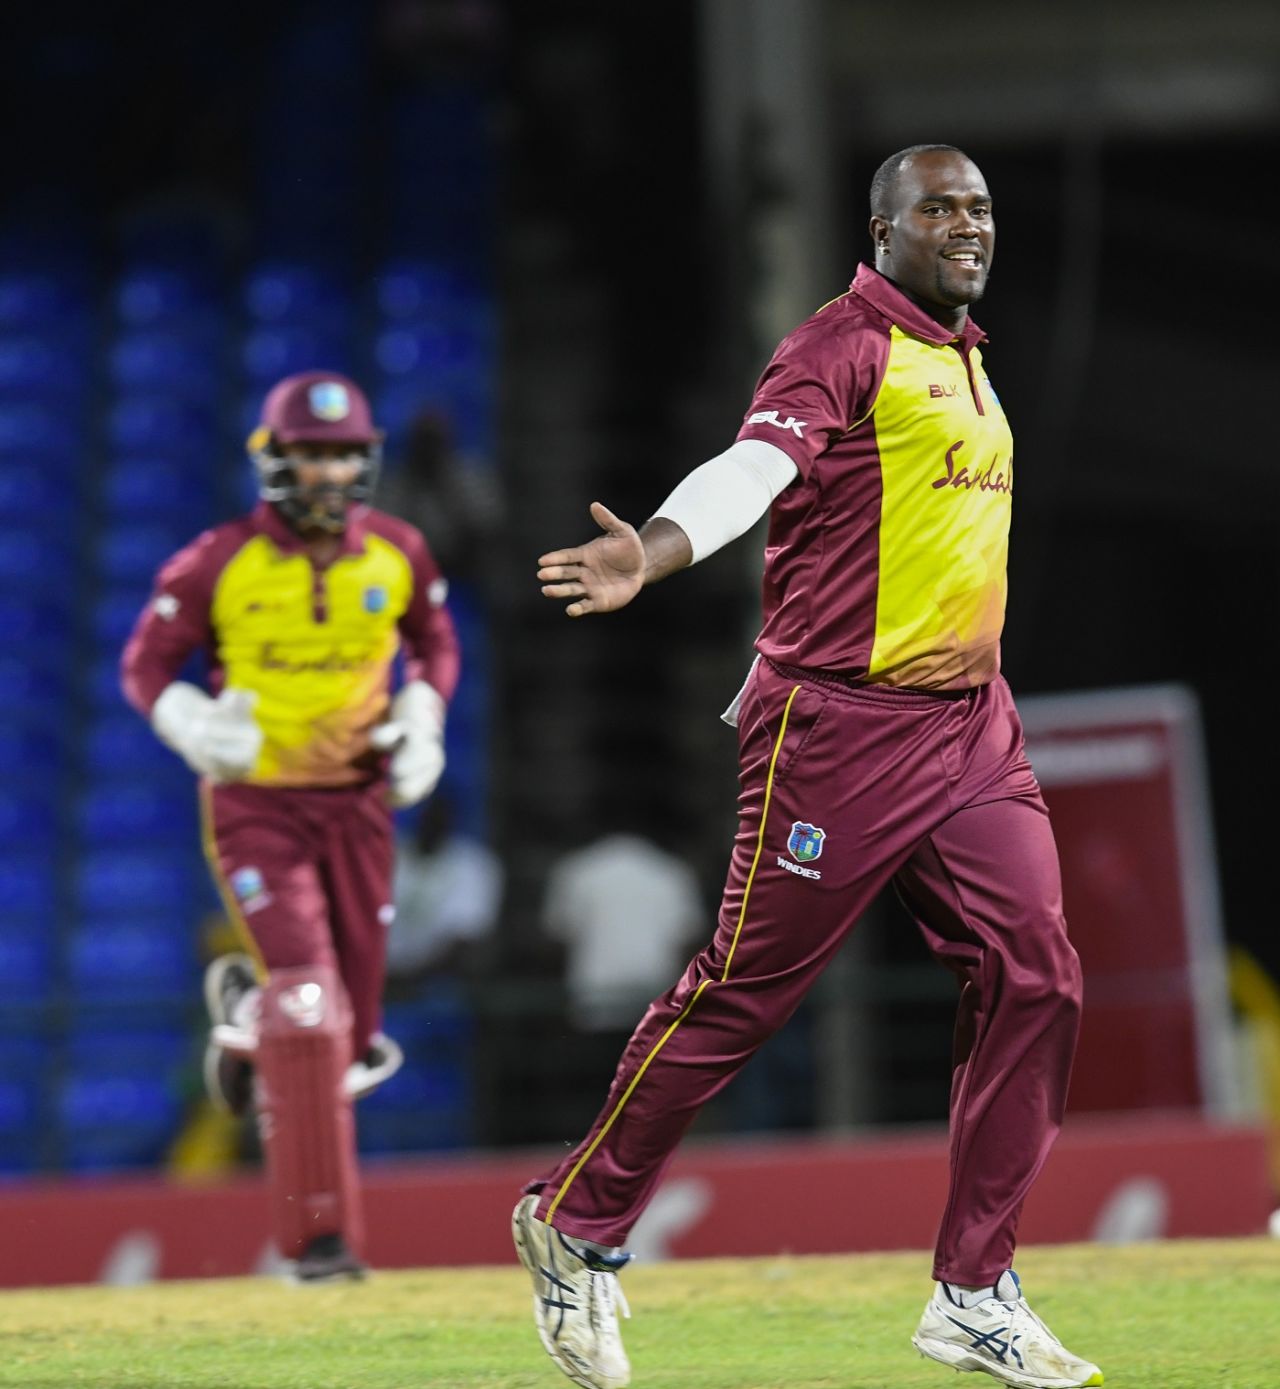 Ashley Nurse rejoices after picking up a wicket, West Indies v Bangladesh, 1st T20I, St Kitts, July 31, 2018